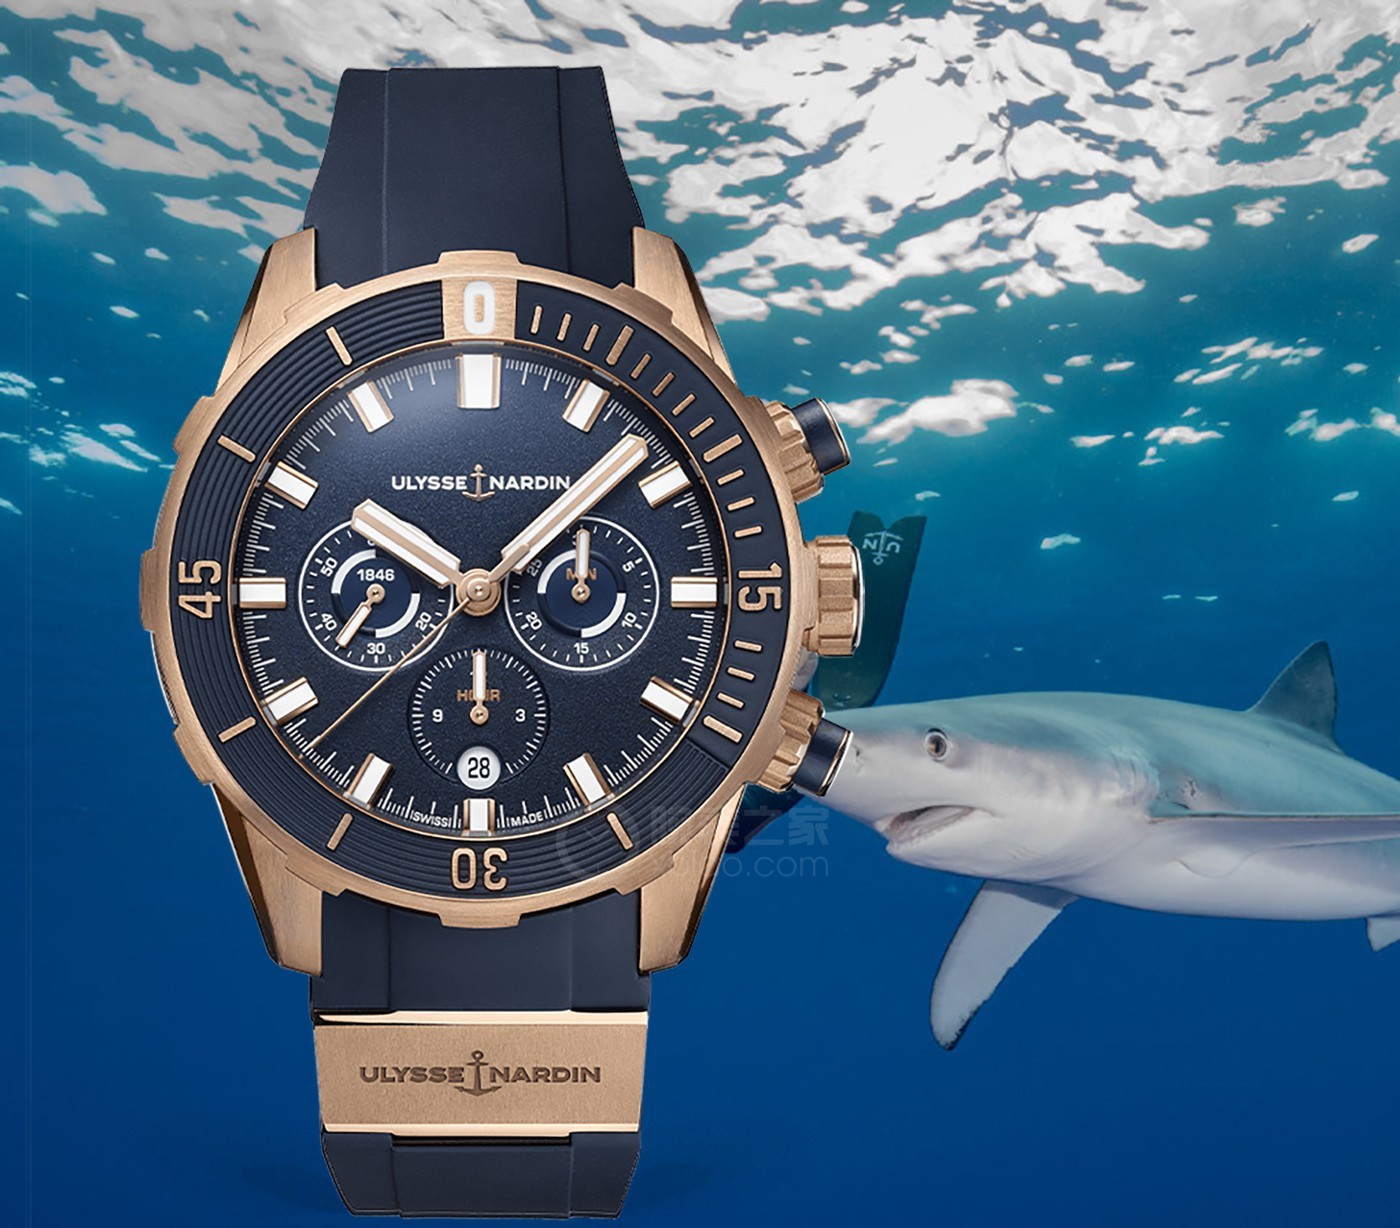 What kind of diving watch can make you unforgettable